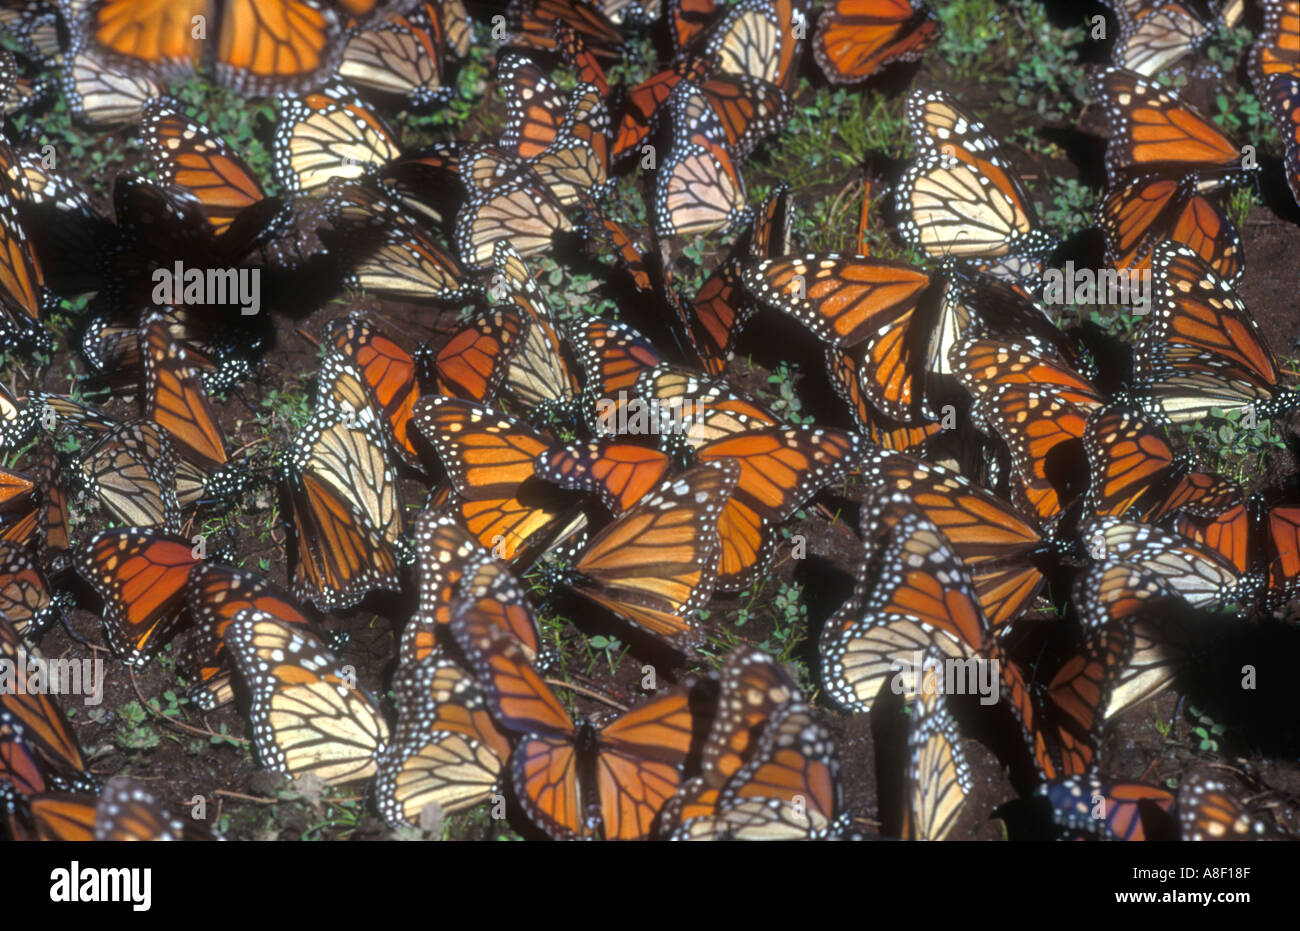 Monarch butterflies carpet the damp forest floor in El Rosario butterfly sanctuary near Anganguaeo, Michoacan, Mexico. Stock Photo